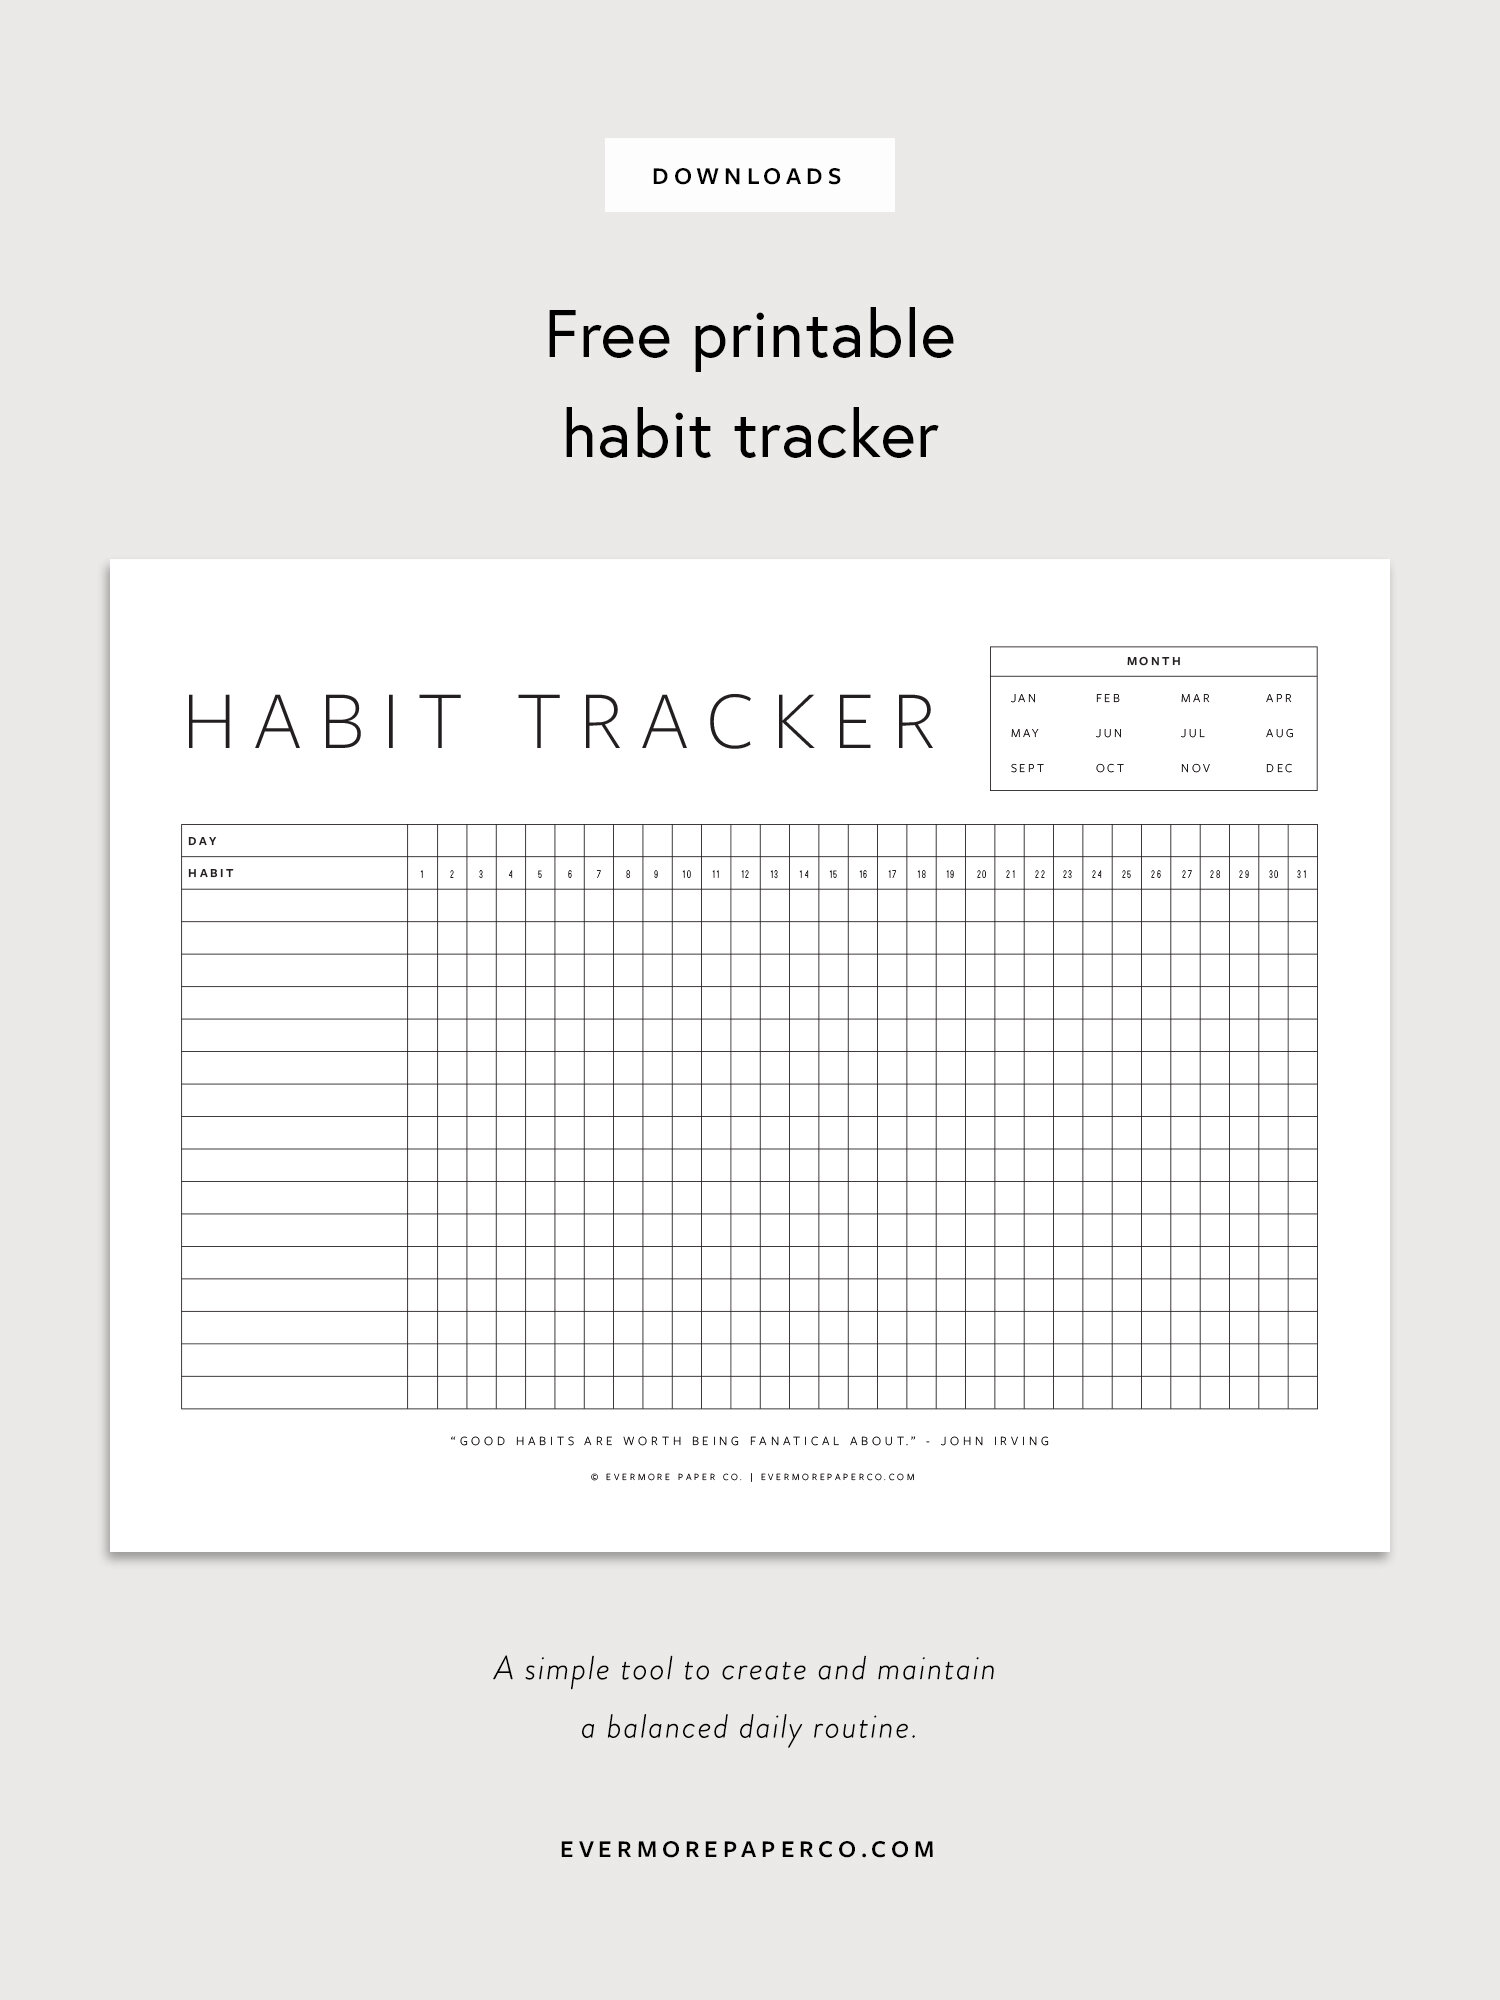 Free Printable Habit Tracker | Evermore Paper Co.